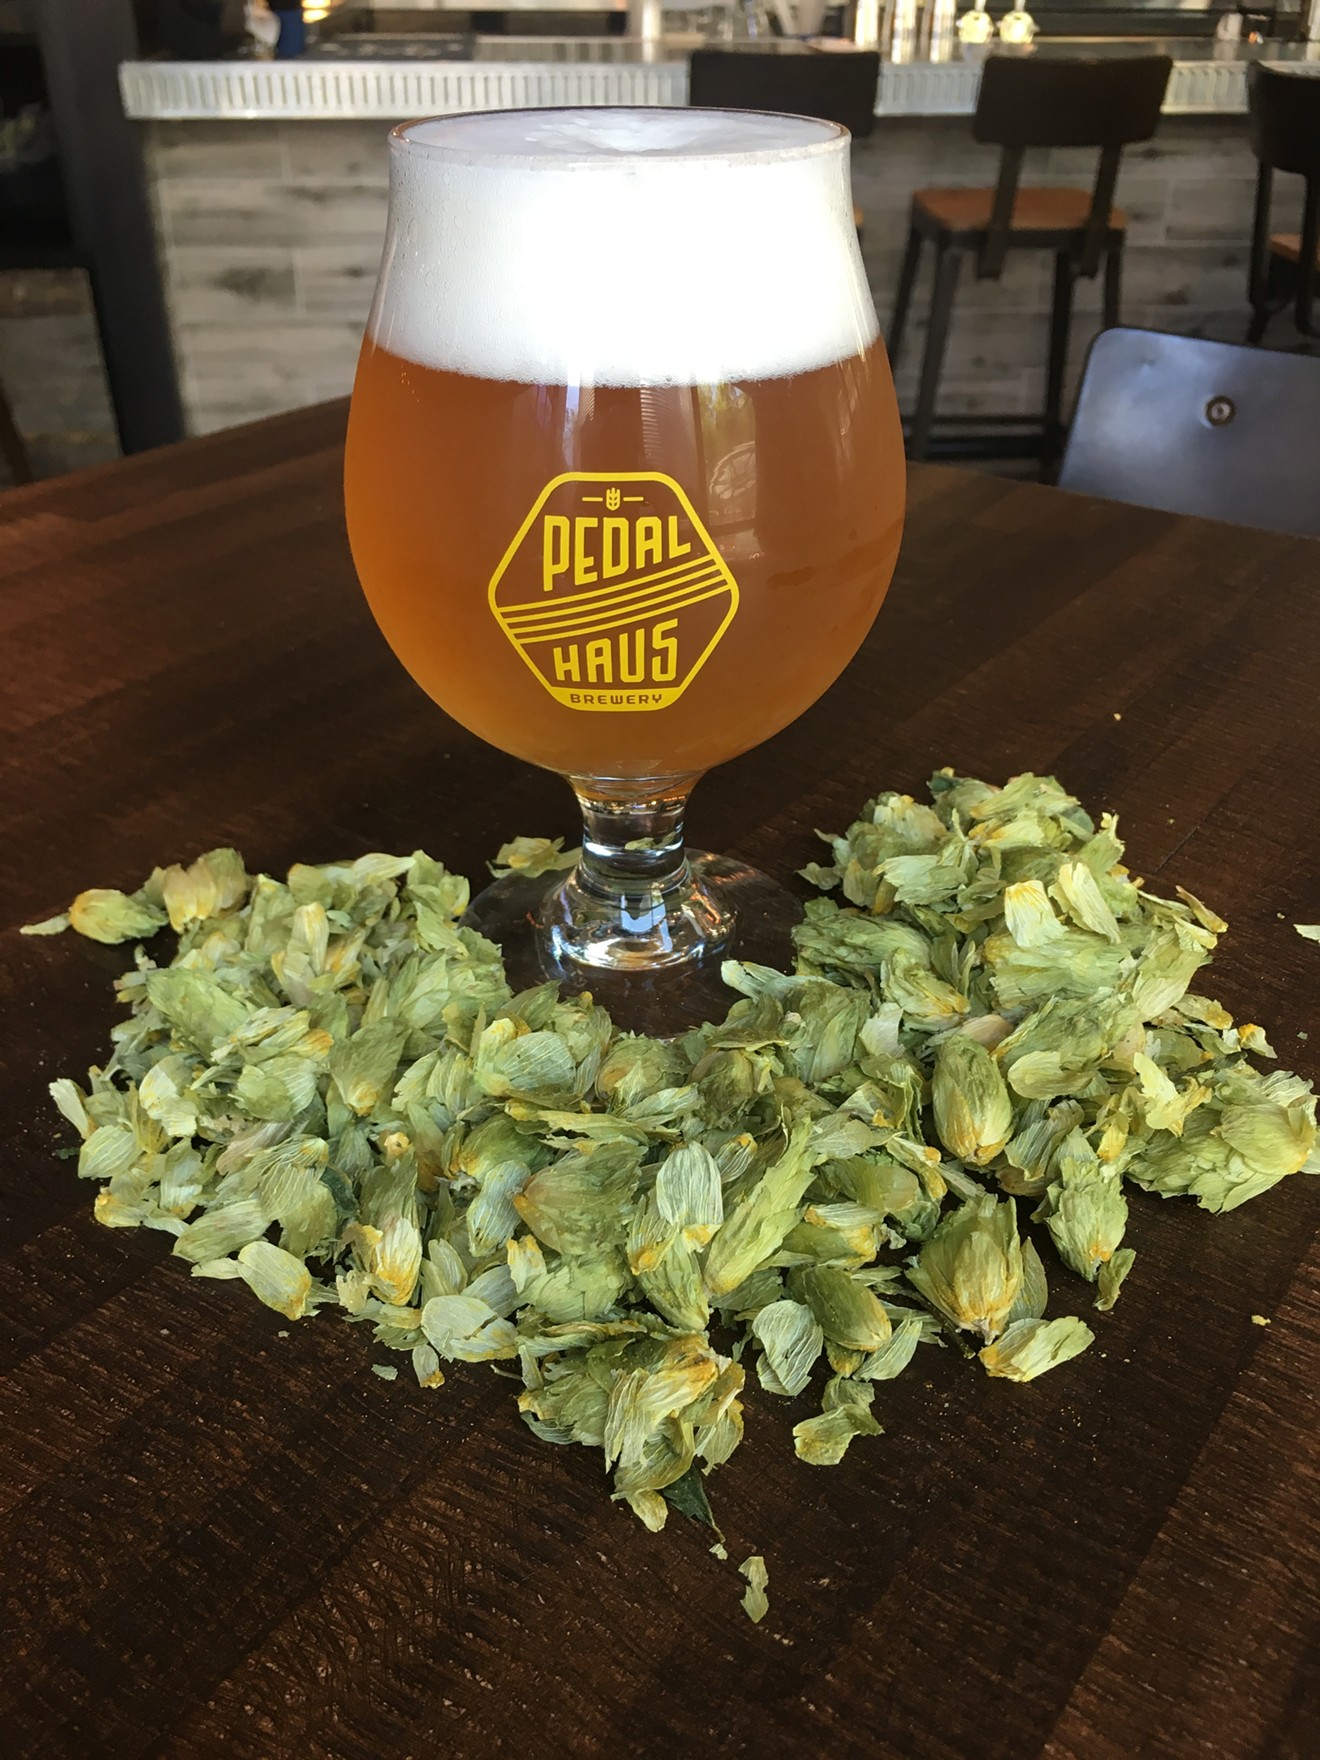 rICON, a New England-style rye IPA, brewed in tribute to Ian Campbell-O'Neill, is available now at Pedal Haus Brewing in Tempe.